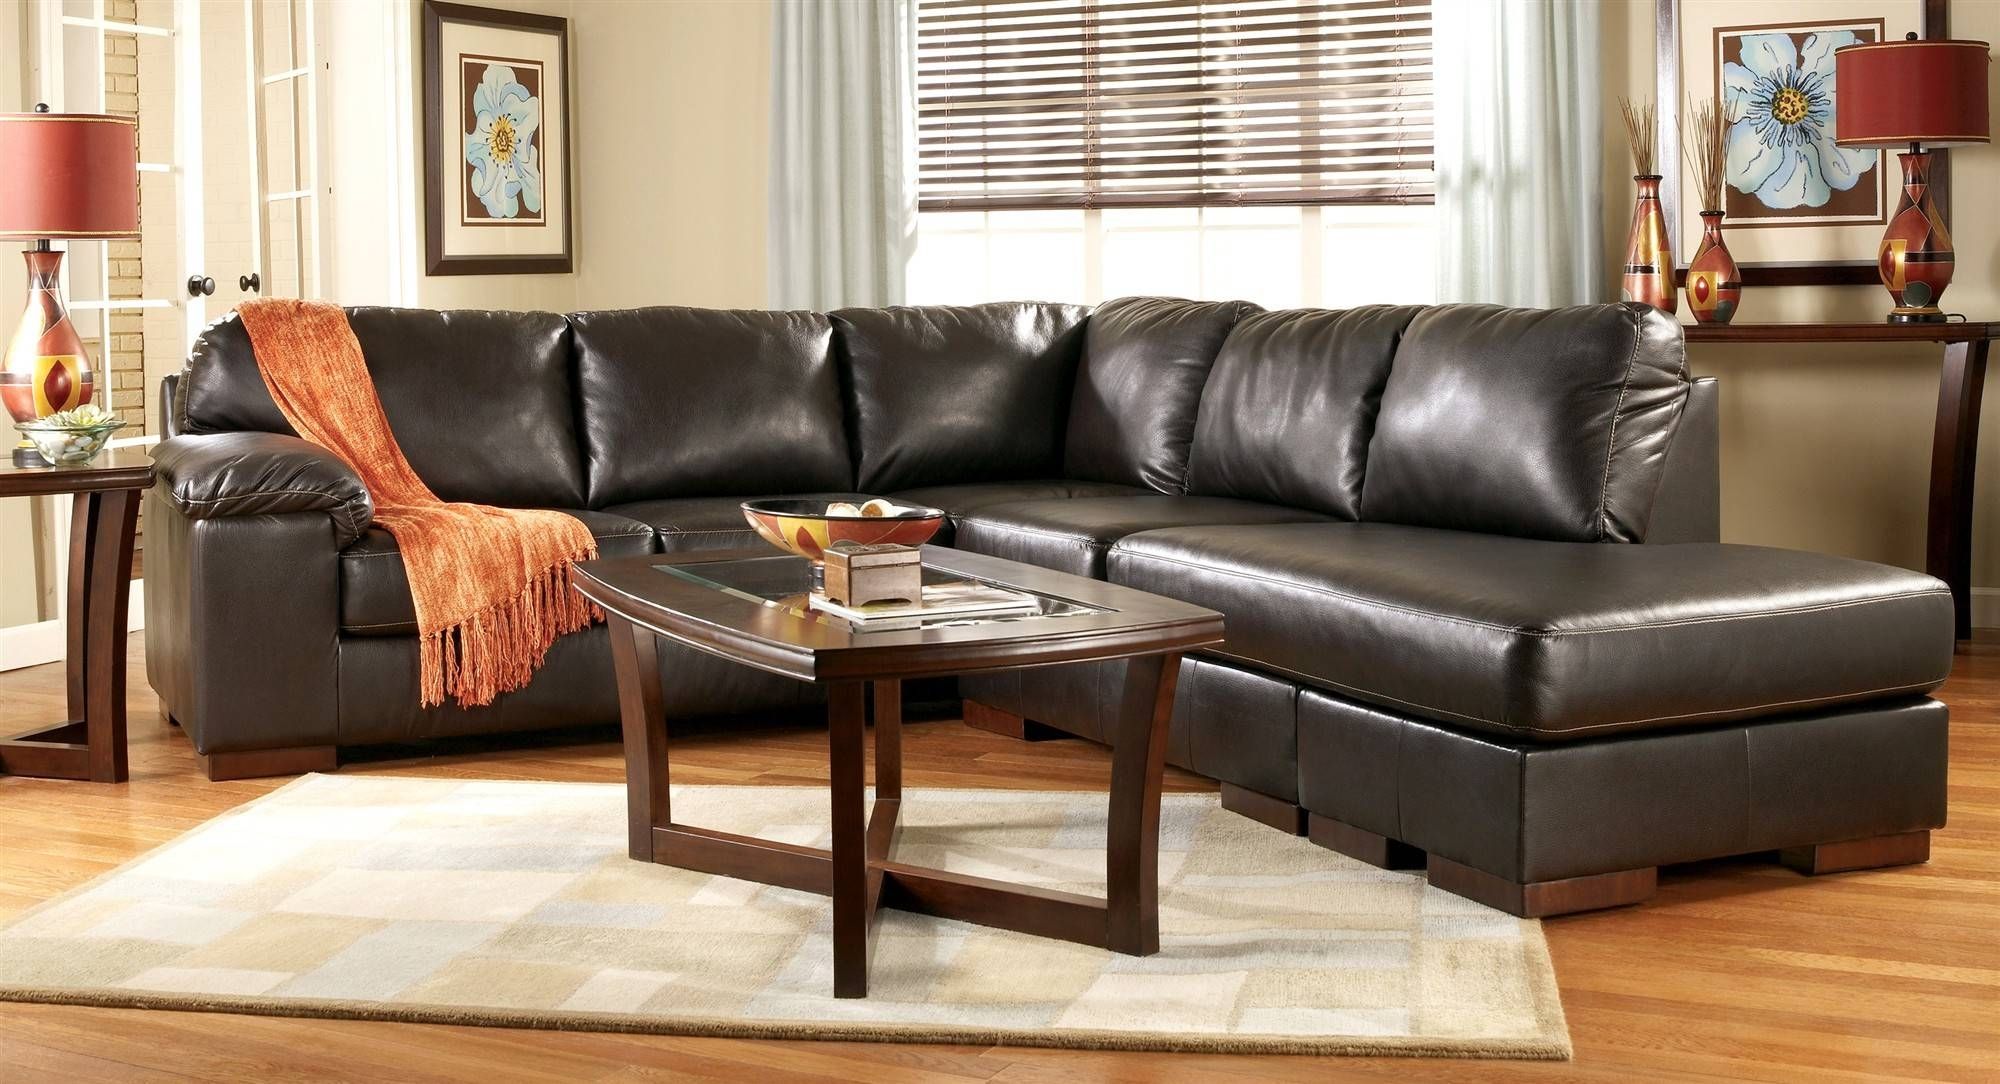 Black Leather Sofas For Sale. Sale Omega Modern Black Leather With Regard To Dark Red Leather Couches (Photo 13 of 15)